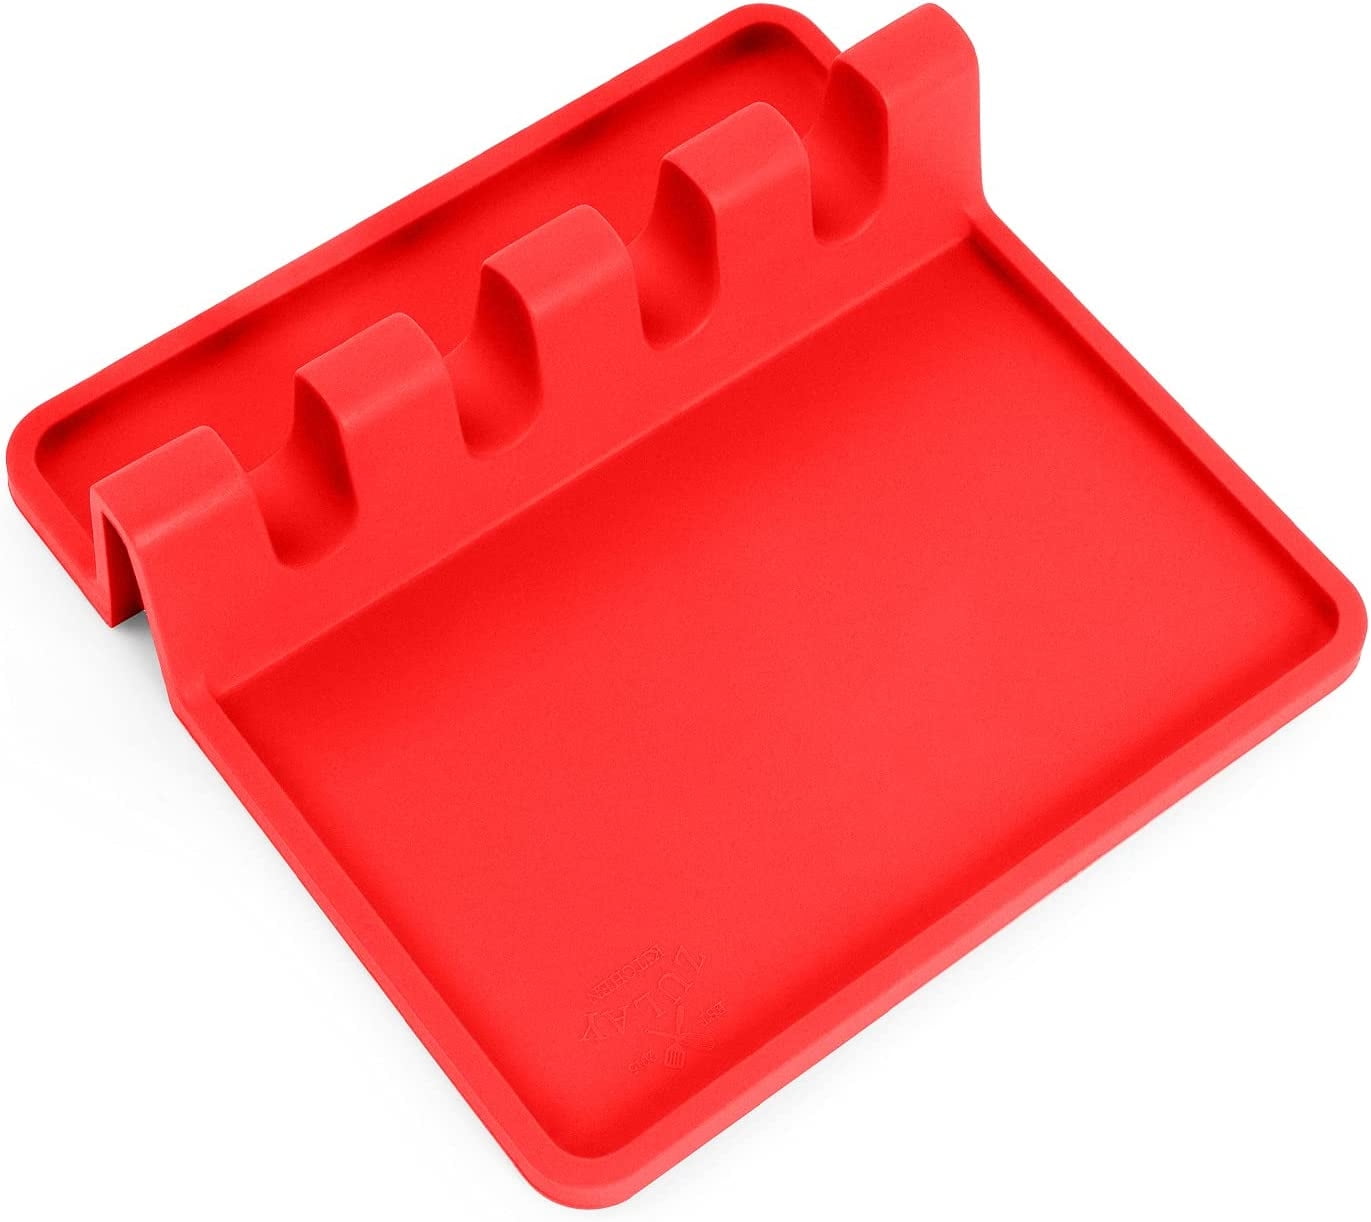 UHMER Silicone Spoon Rest for Kitchen - Large Heat-Resistant Utensil Rest for Countertop, BPA Free Spoon Holder for Stove Top (Red)